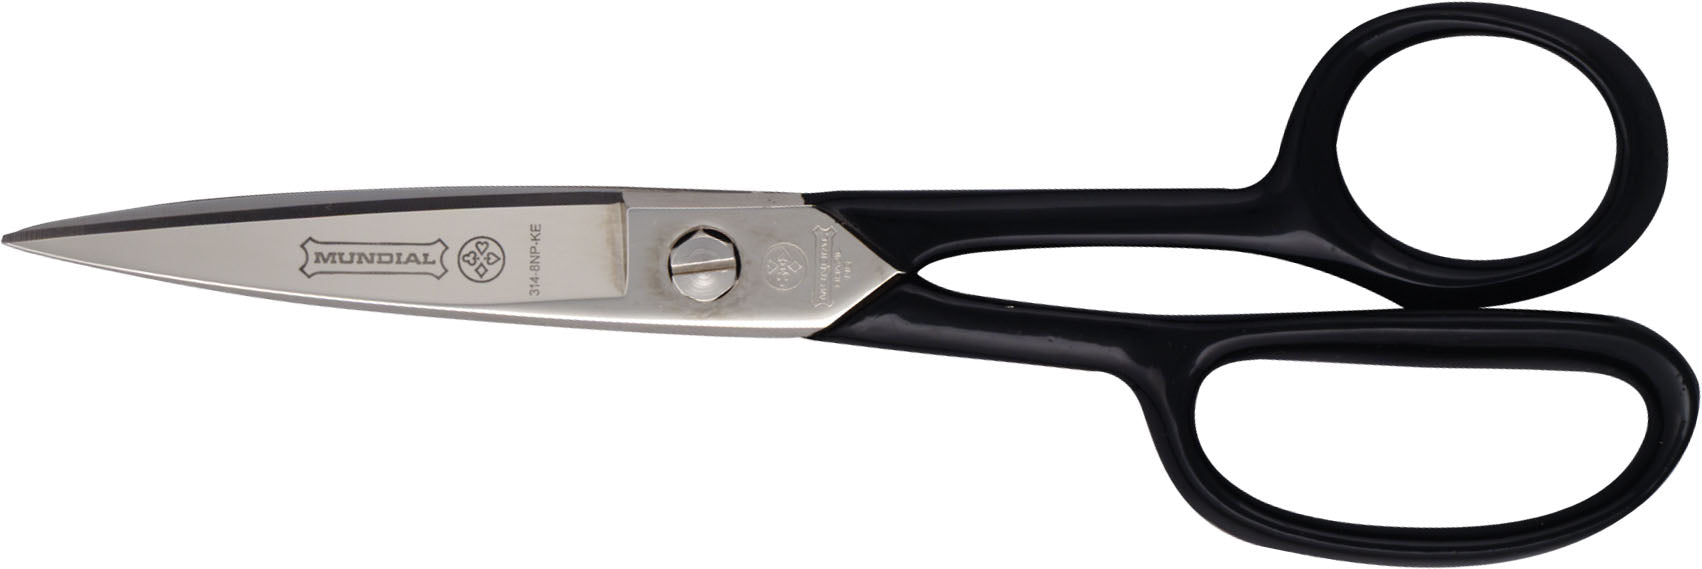 Mundial 8" All Metal Straight Shear with a Coated Handle